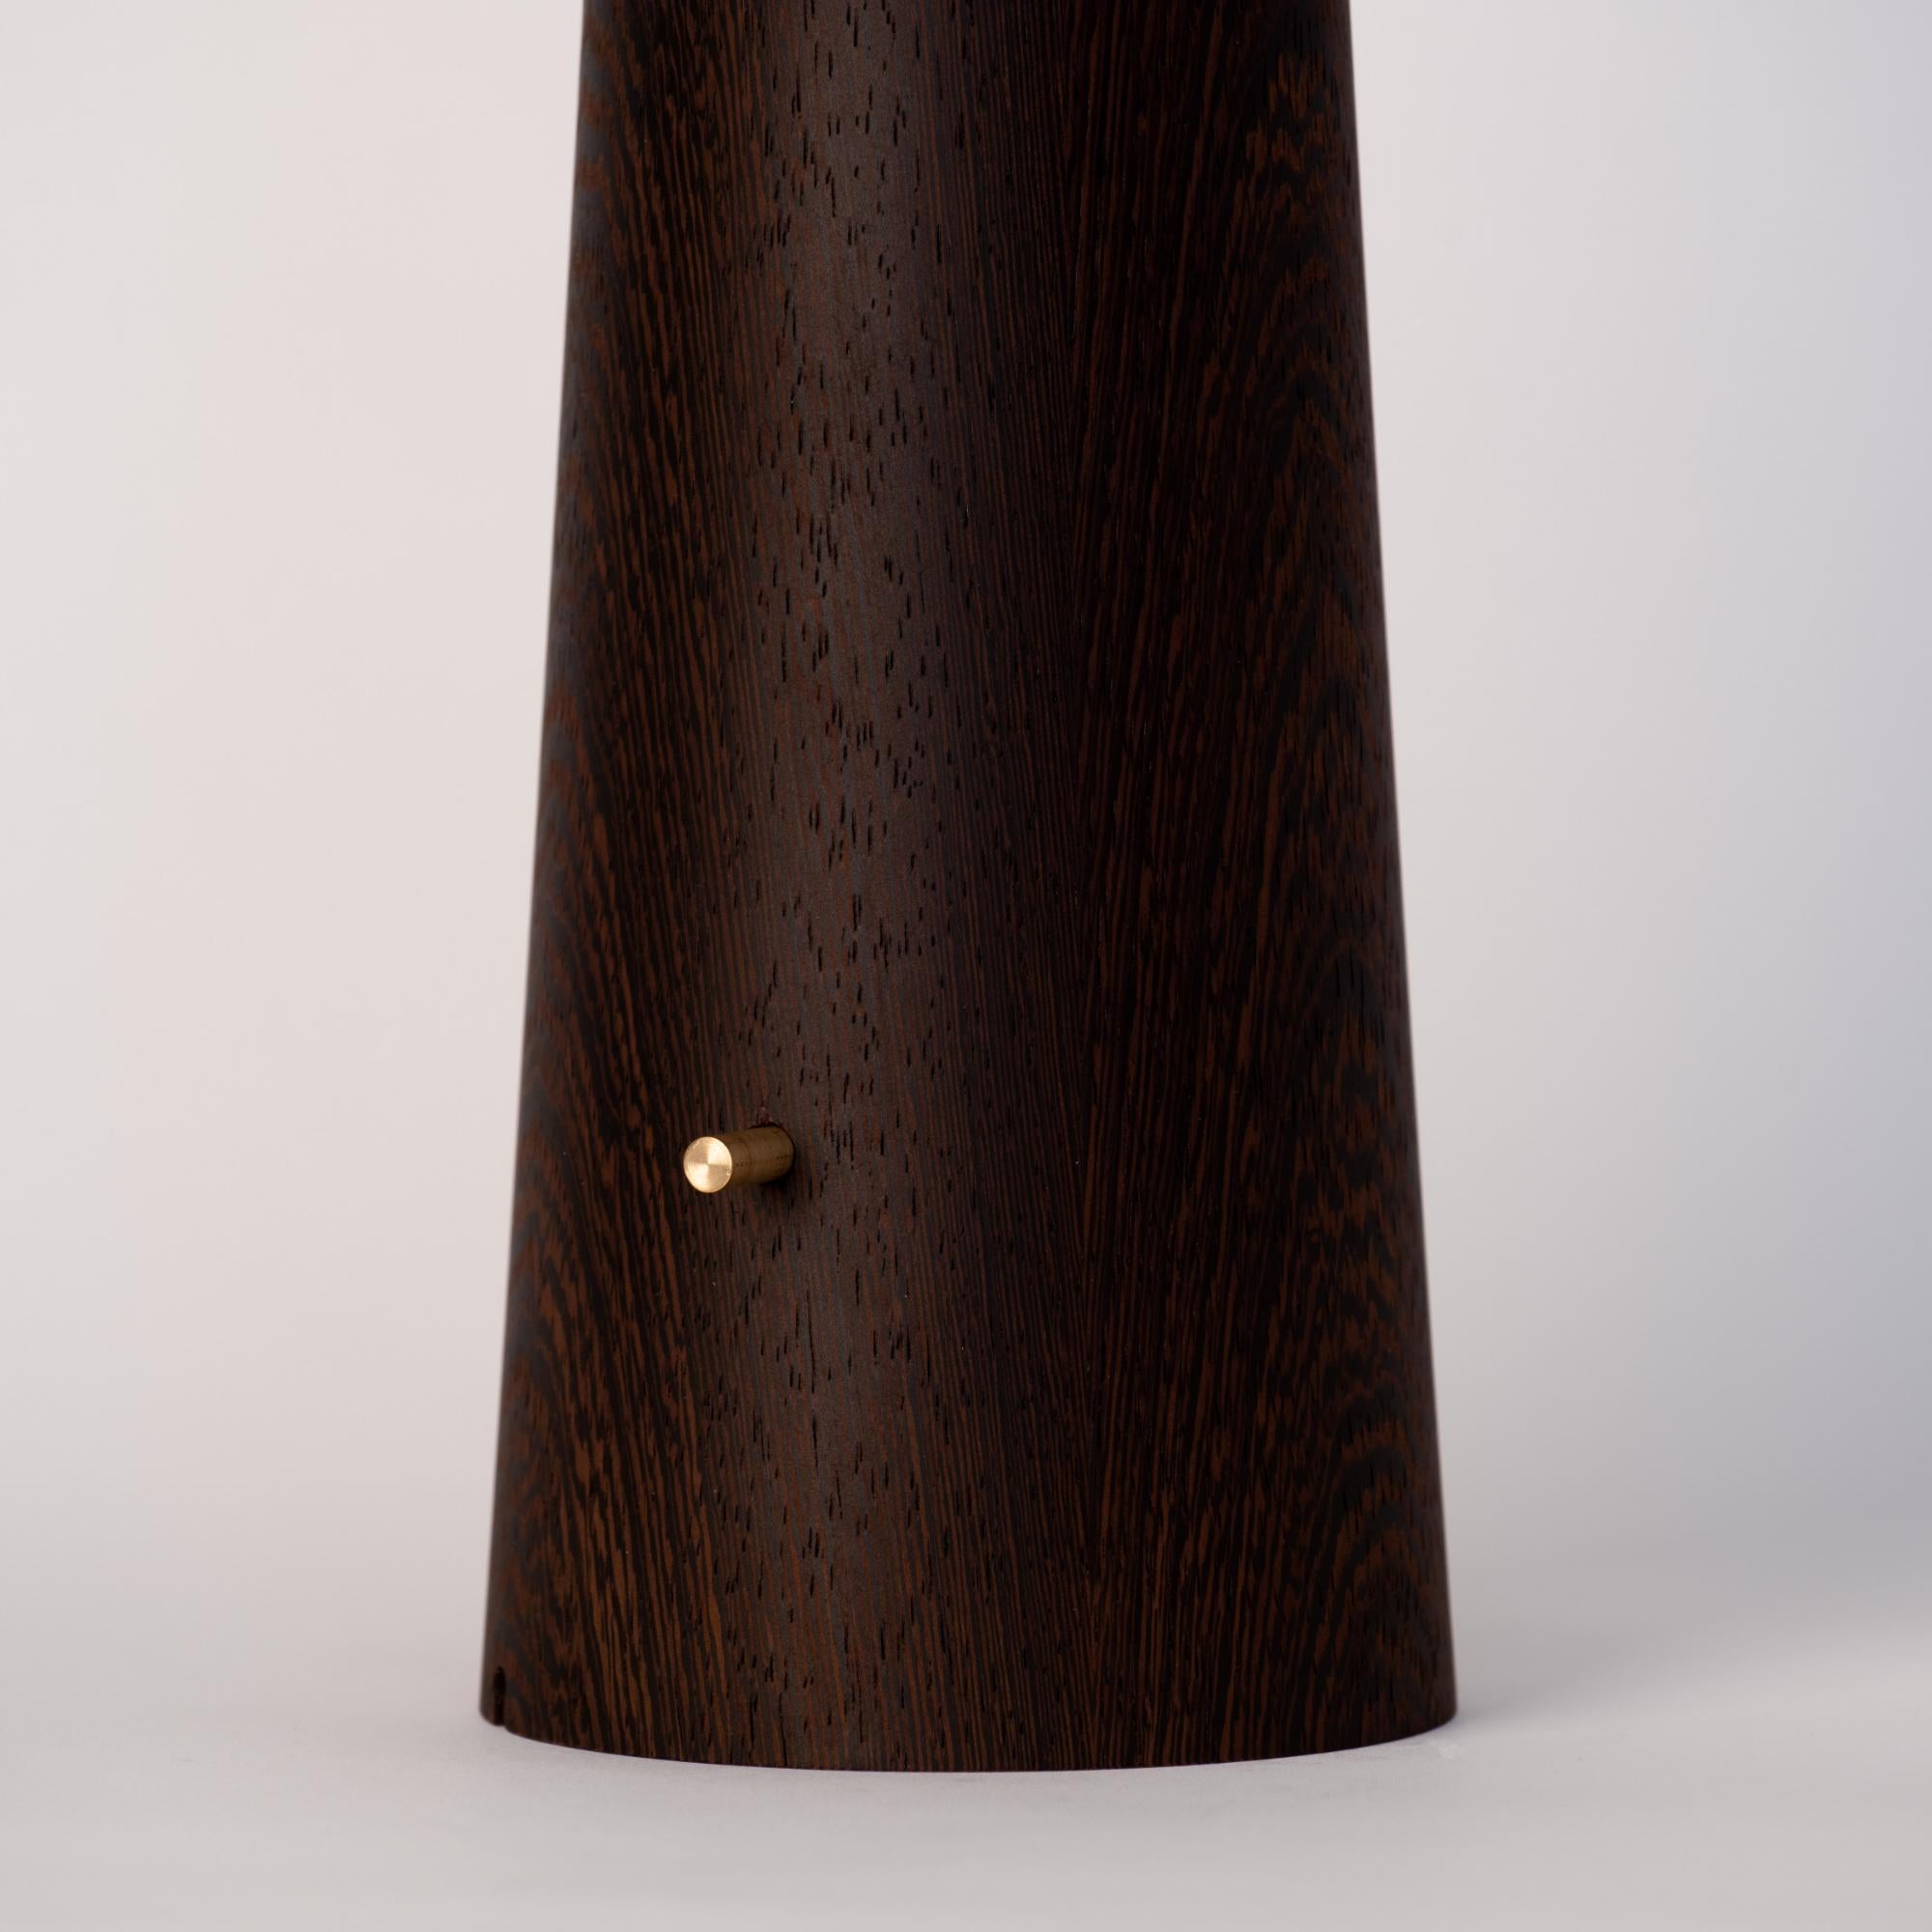 Wengè Wood, Studio Light by Isato Prugger In New Condition For Sale In Geneve, CH